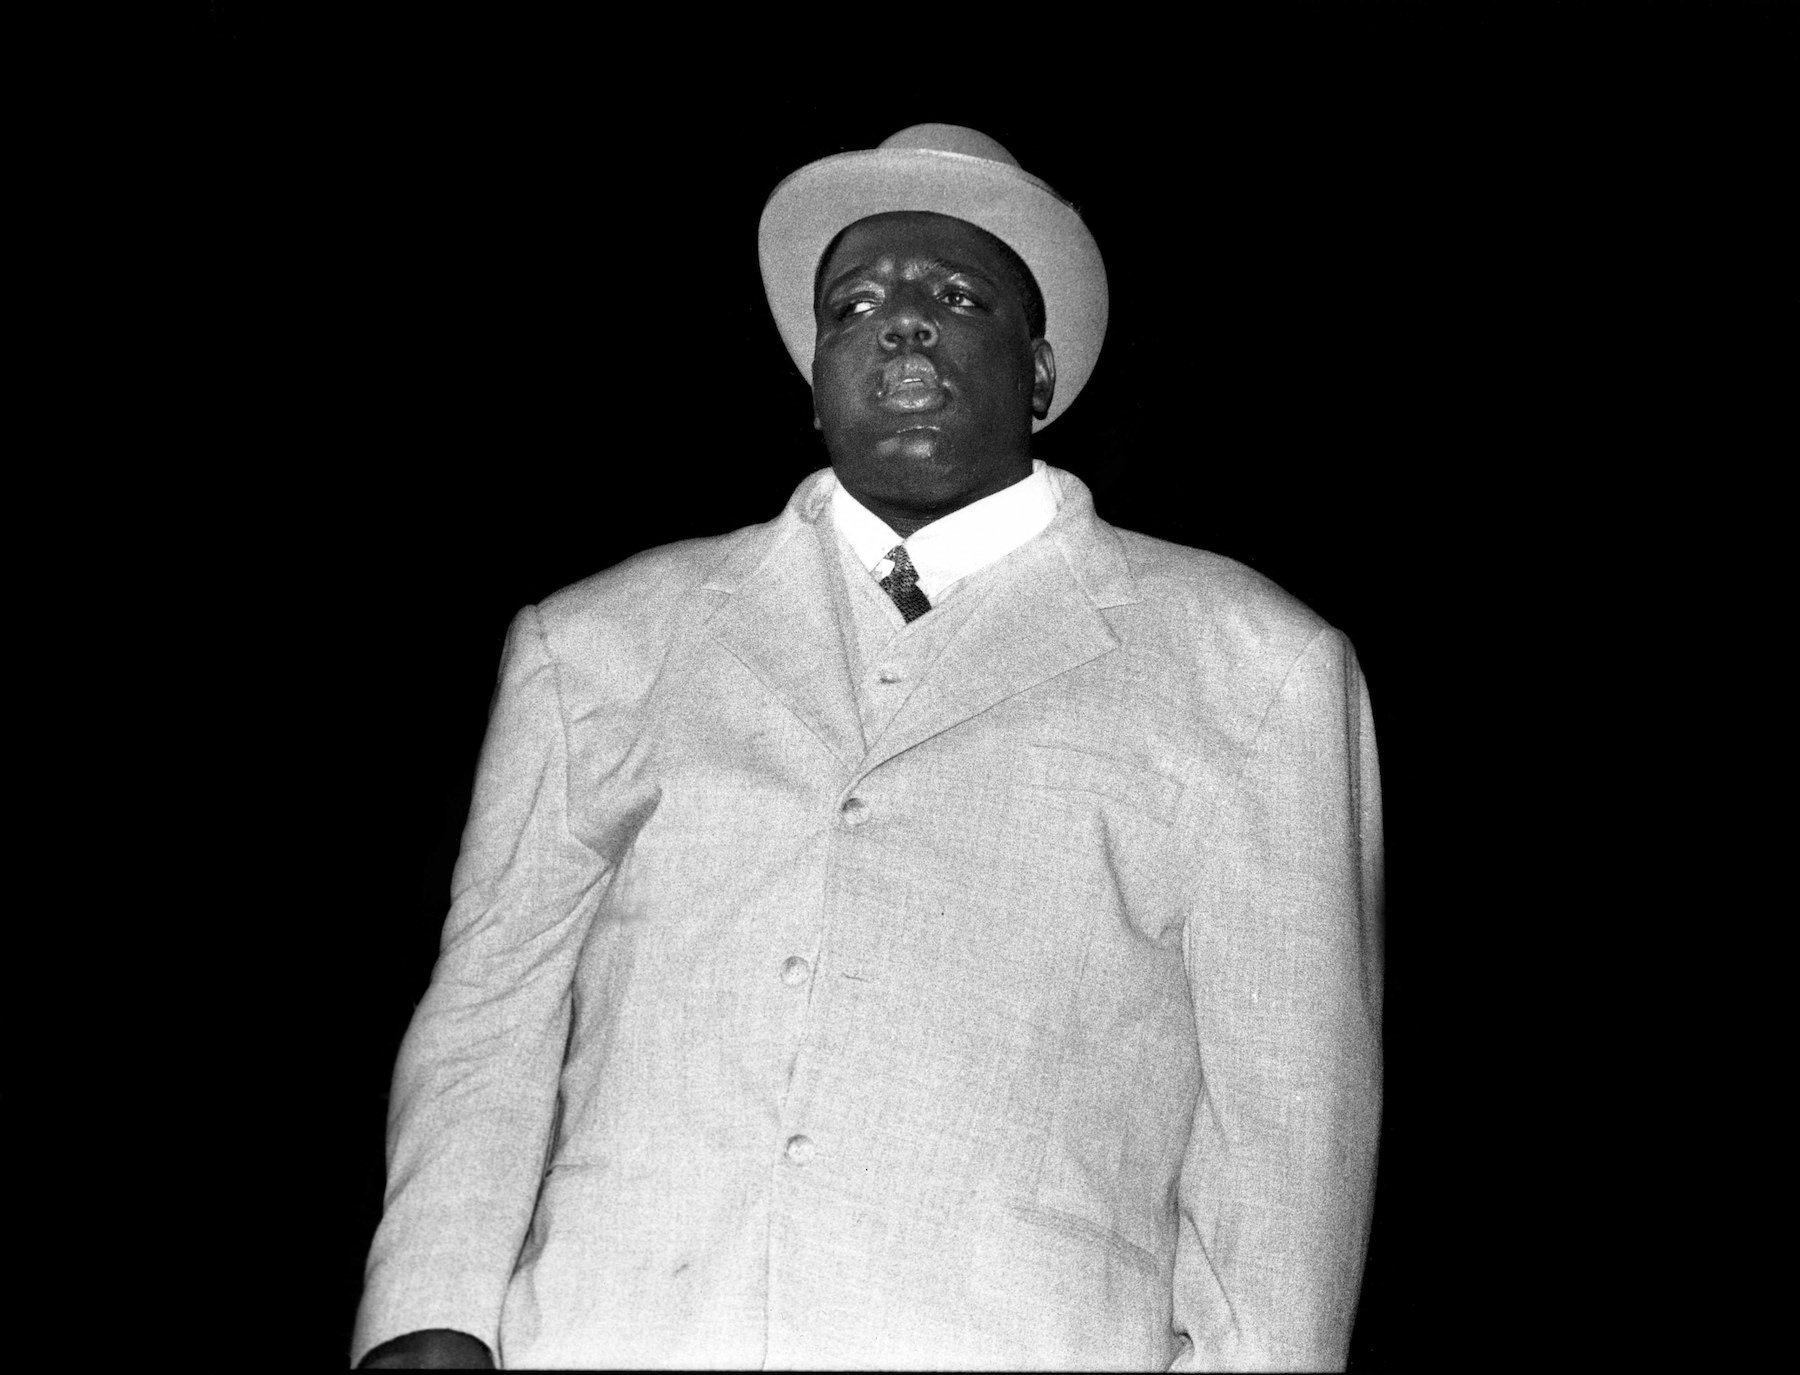 The Notorious B.I.G., wearing a suit similar to the one he wore in his appearance on 'Martin', posing for a photo